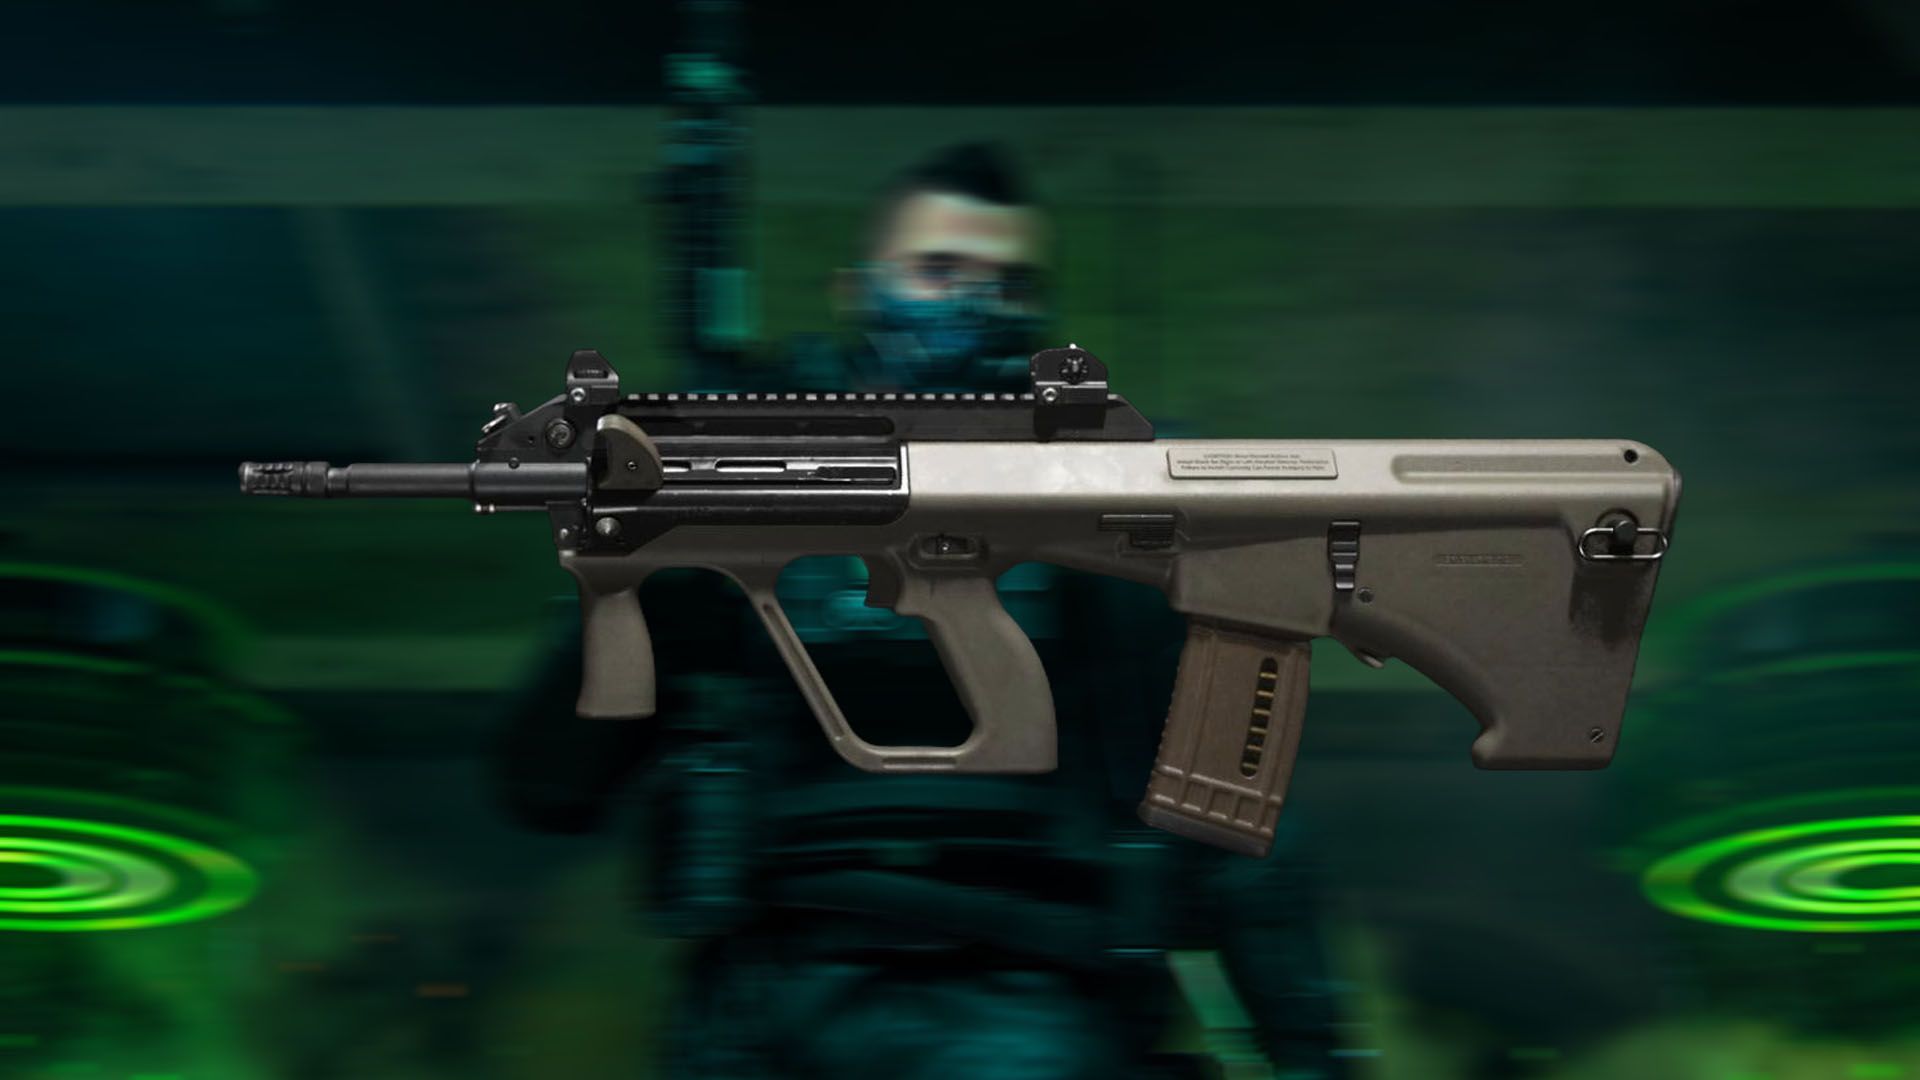 Warzone STB 556 assault rifle on background of blurred Call of Duty player